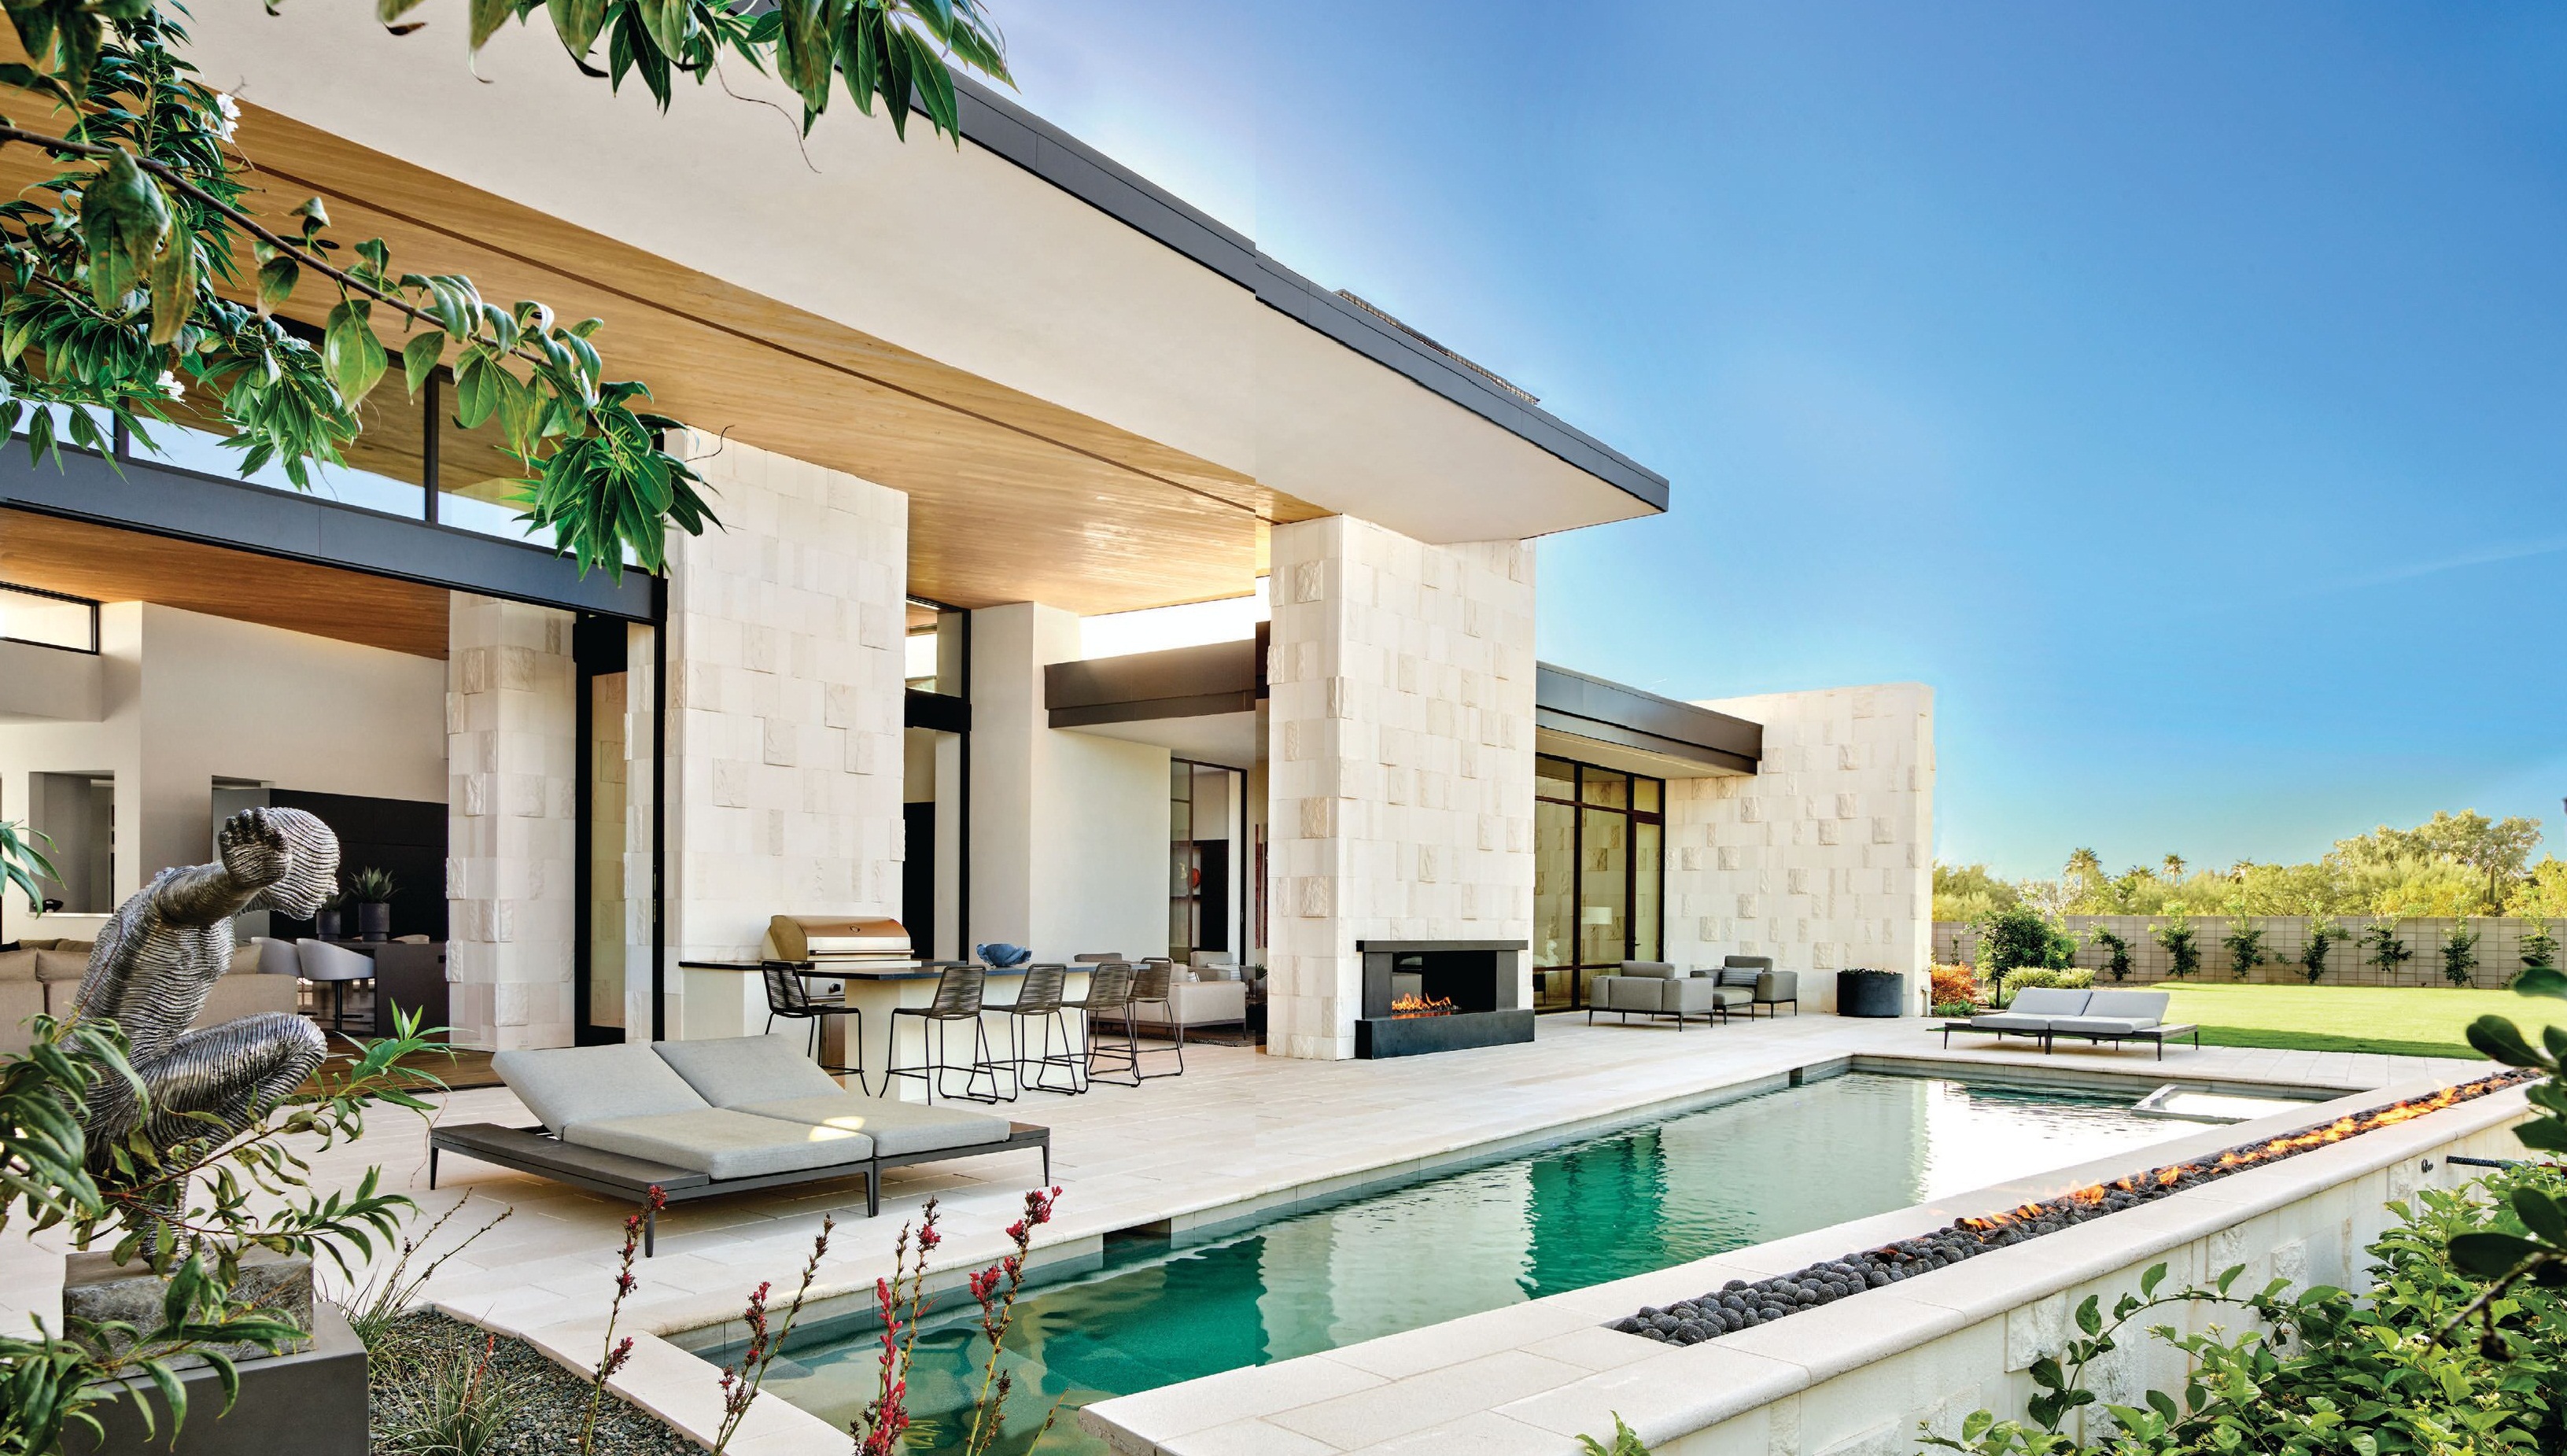 The home’s pool and patio area features streamlined furniture  from Gloster’s Grid collection and an outdoor kitchen outfitted with Wolf appliances. PHOTOGRAPHED BY WERNER SEGARRA